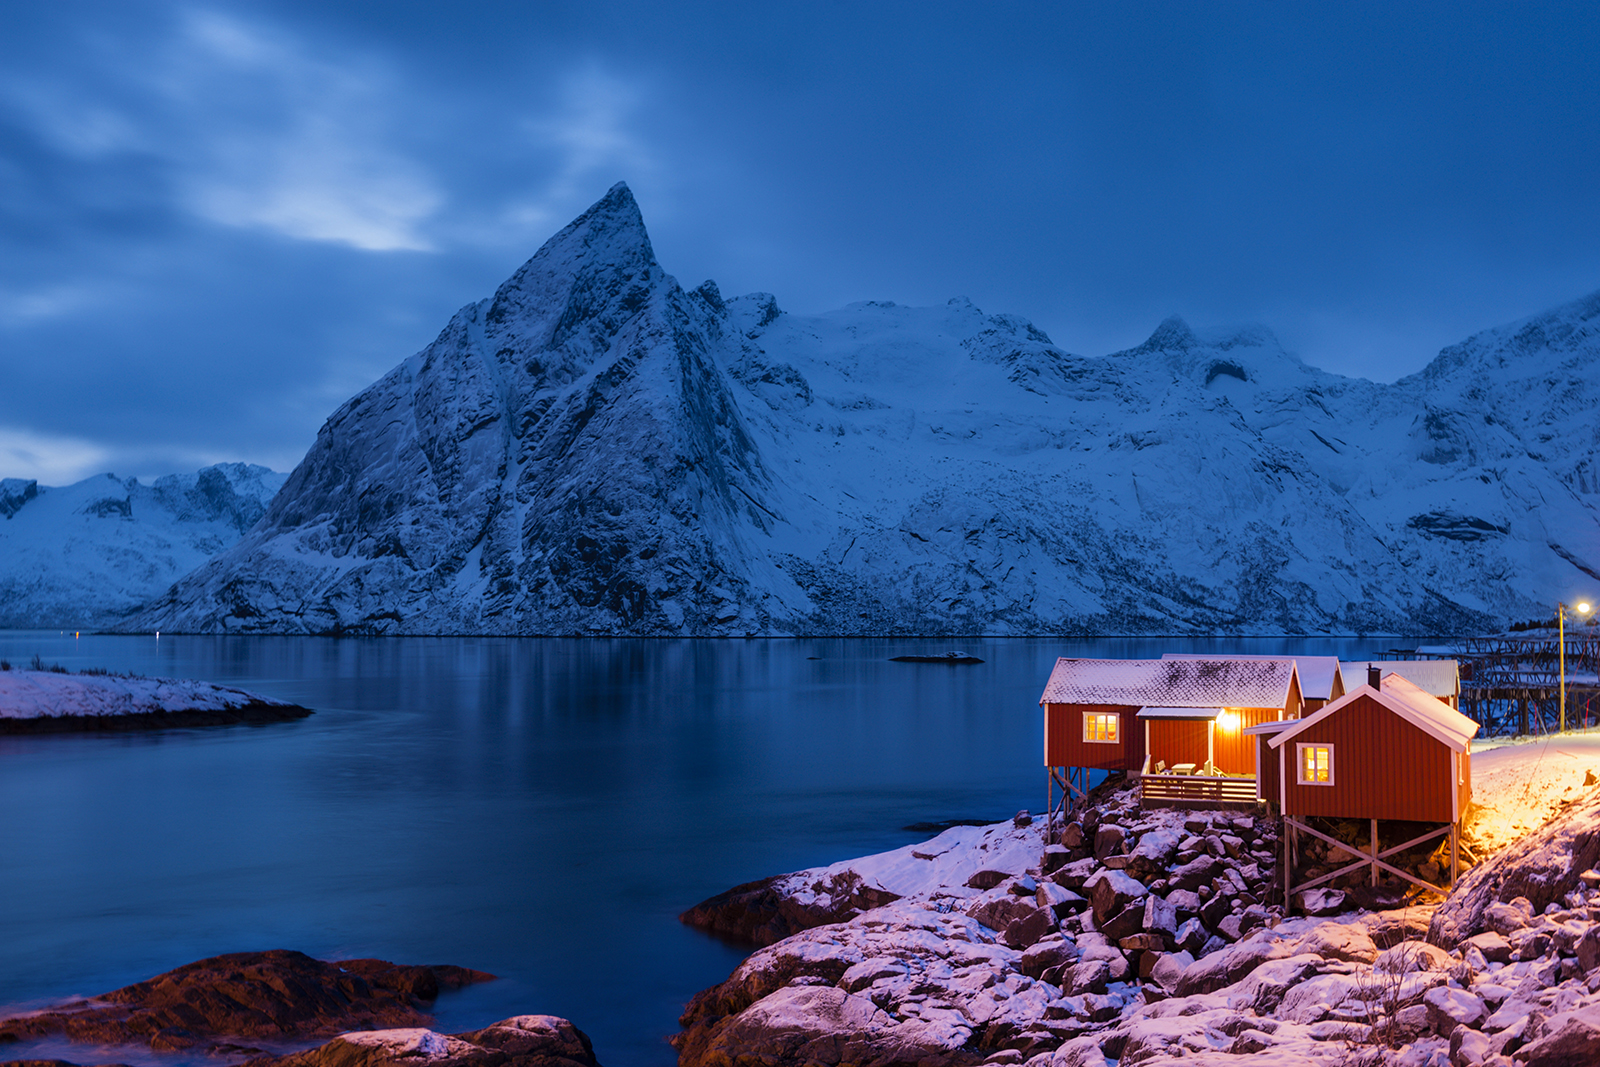 Rorbuer in the village of Hamnoy, at the mouth of the Reinefjord